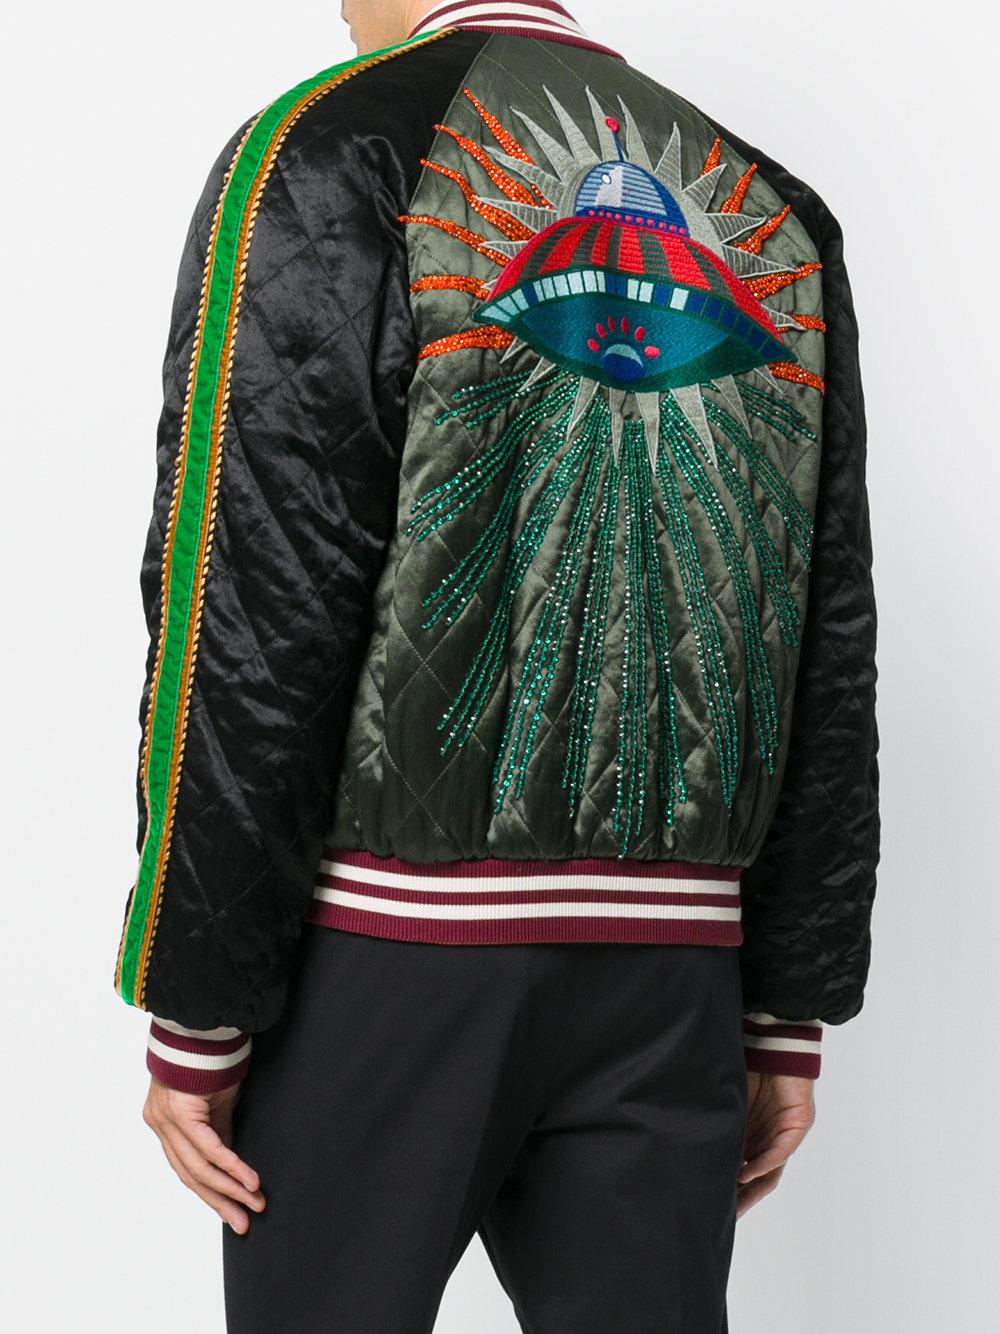 Gucci Cotton Ufo Embroidered Bomber Jacket in Green for Men - Lyst